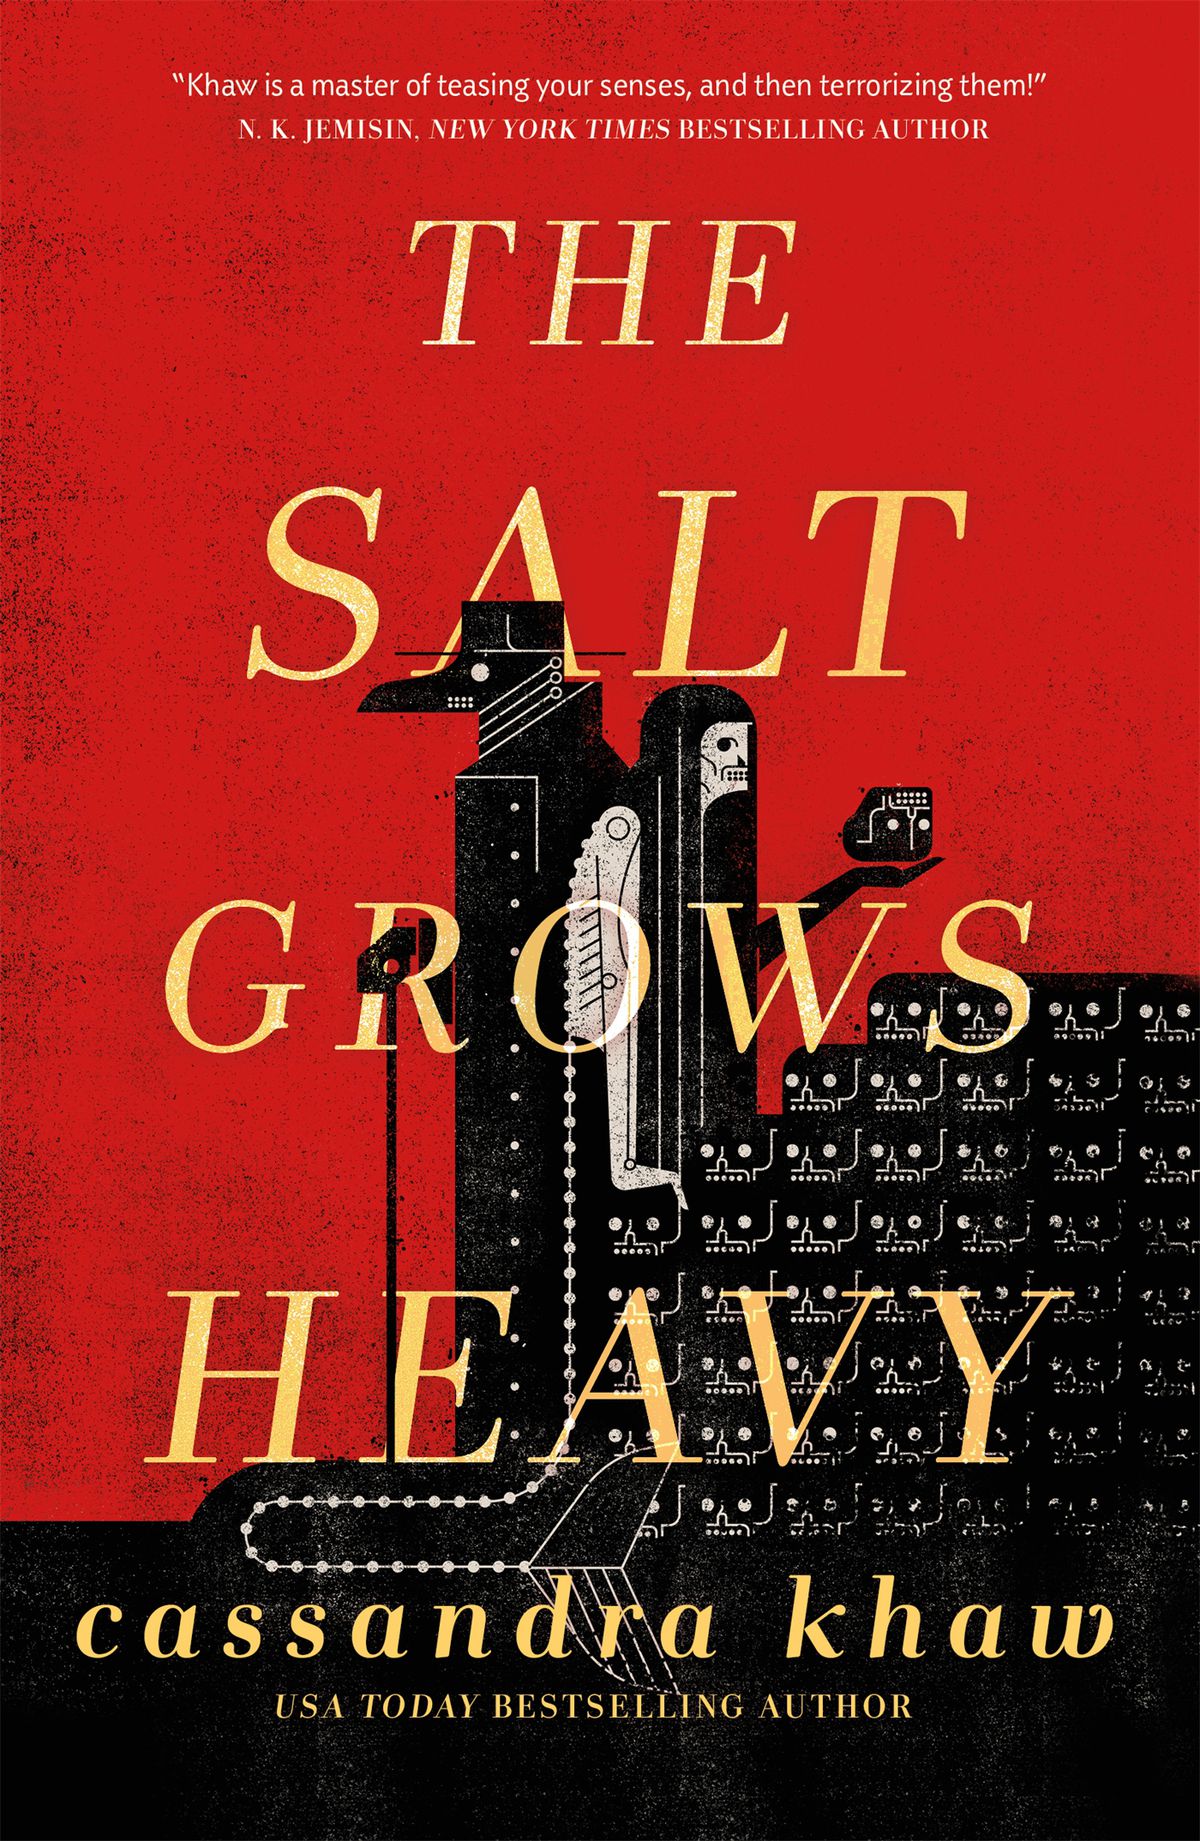 Cover image for Cassandra Khaw’s The Salt Grows Heavy. It is an image comprised of blocks set against a red background. A plague doctor looks to the left while a skeletal figure picks up what looks like a head from a pile of block heads.